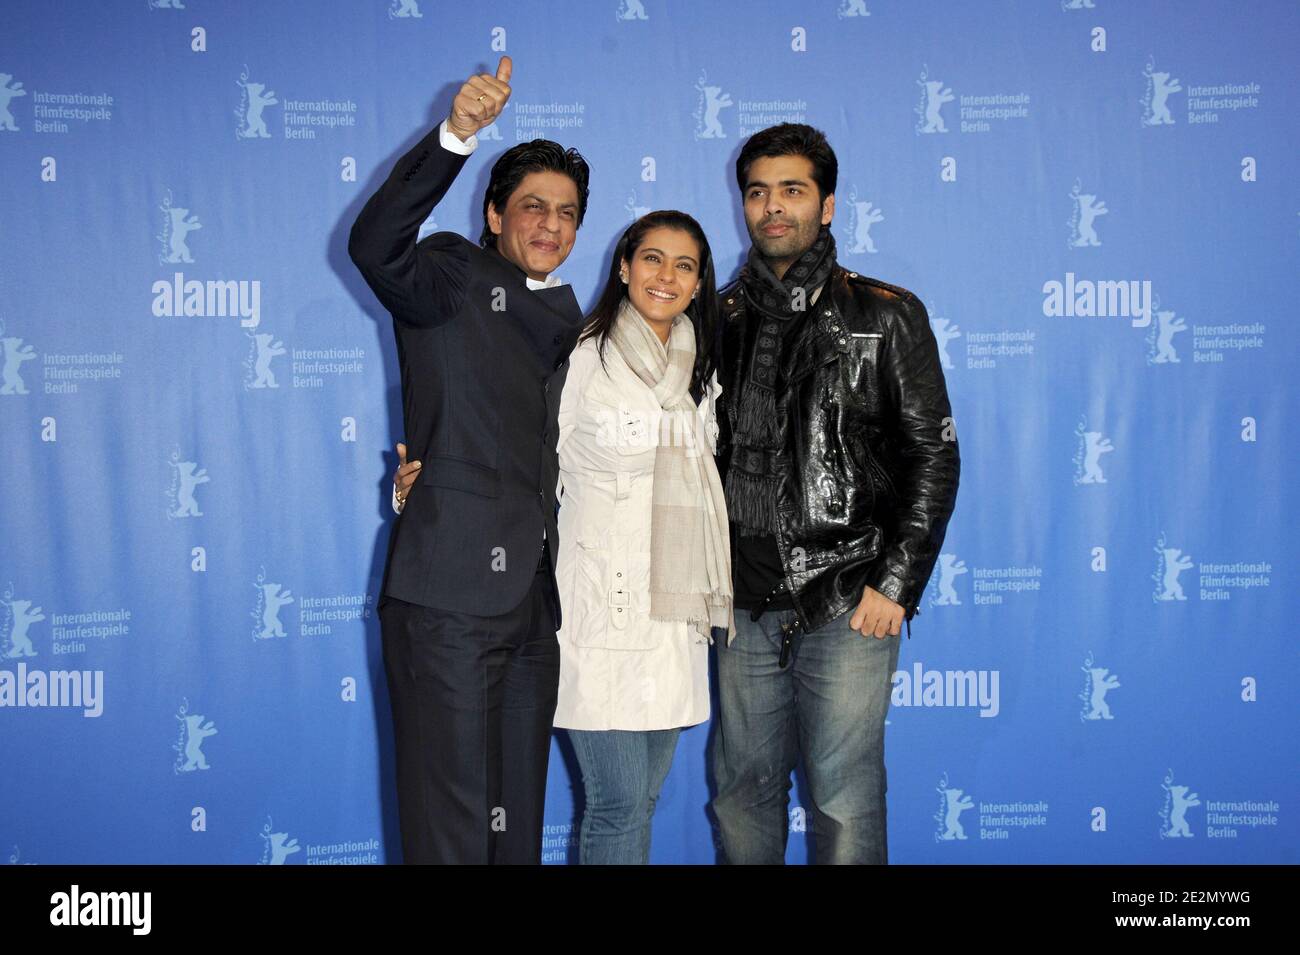 Shah Rukh Khan, Kajol Devgan and Karan Johar during a photocall for 'My name is Khan' as part of the 60th Berlin Film Festival at the Grand Hyatt Hotel in Berlin, Germany on February 12, 2010. Photo by Nicolas Briquet/ABACAPRESS.COM Stock Photo